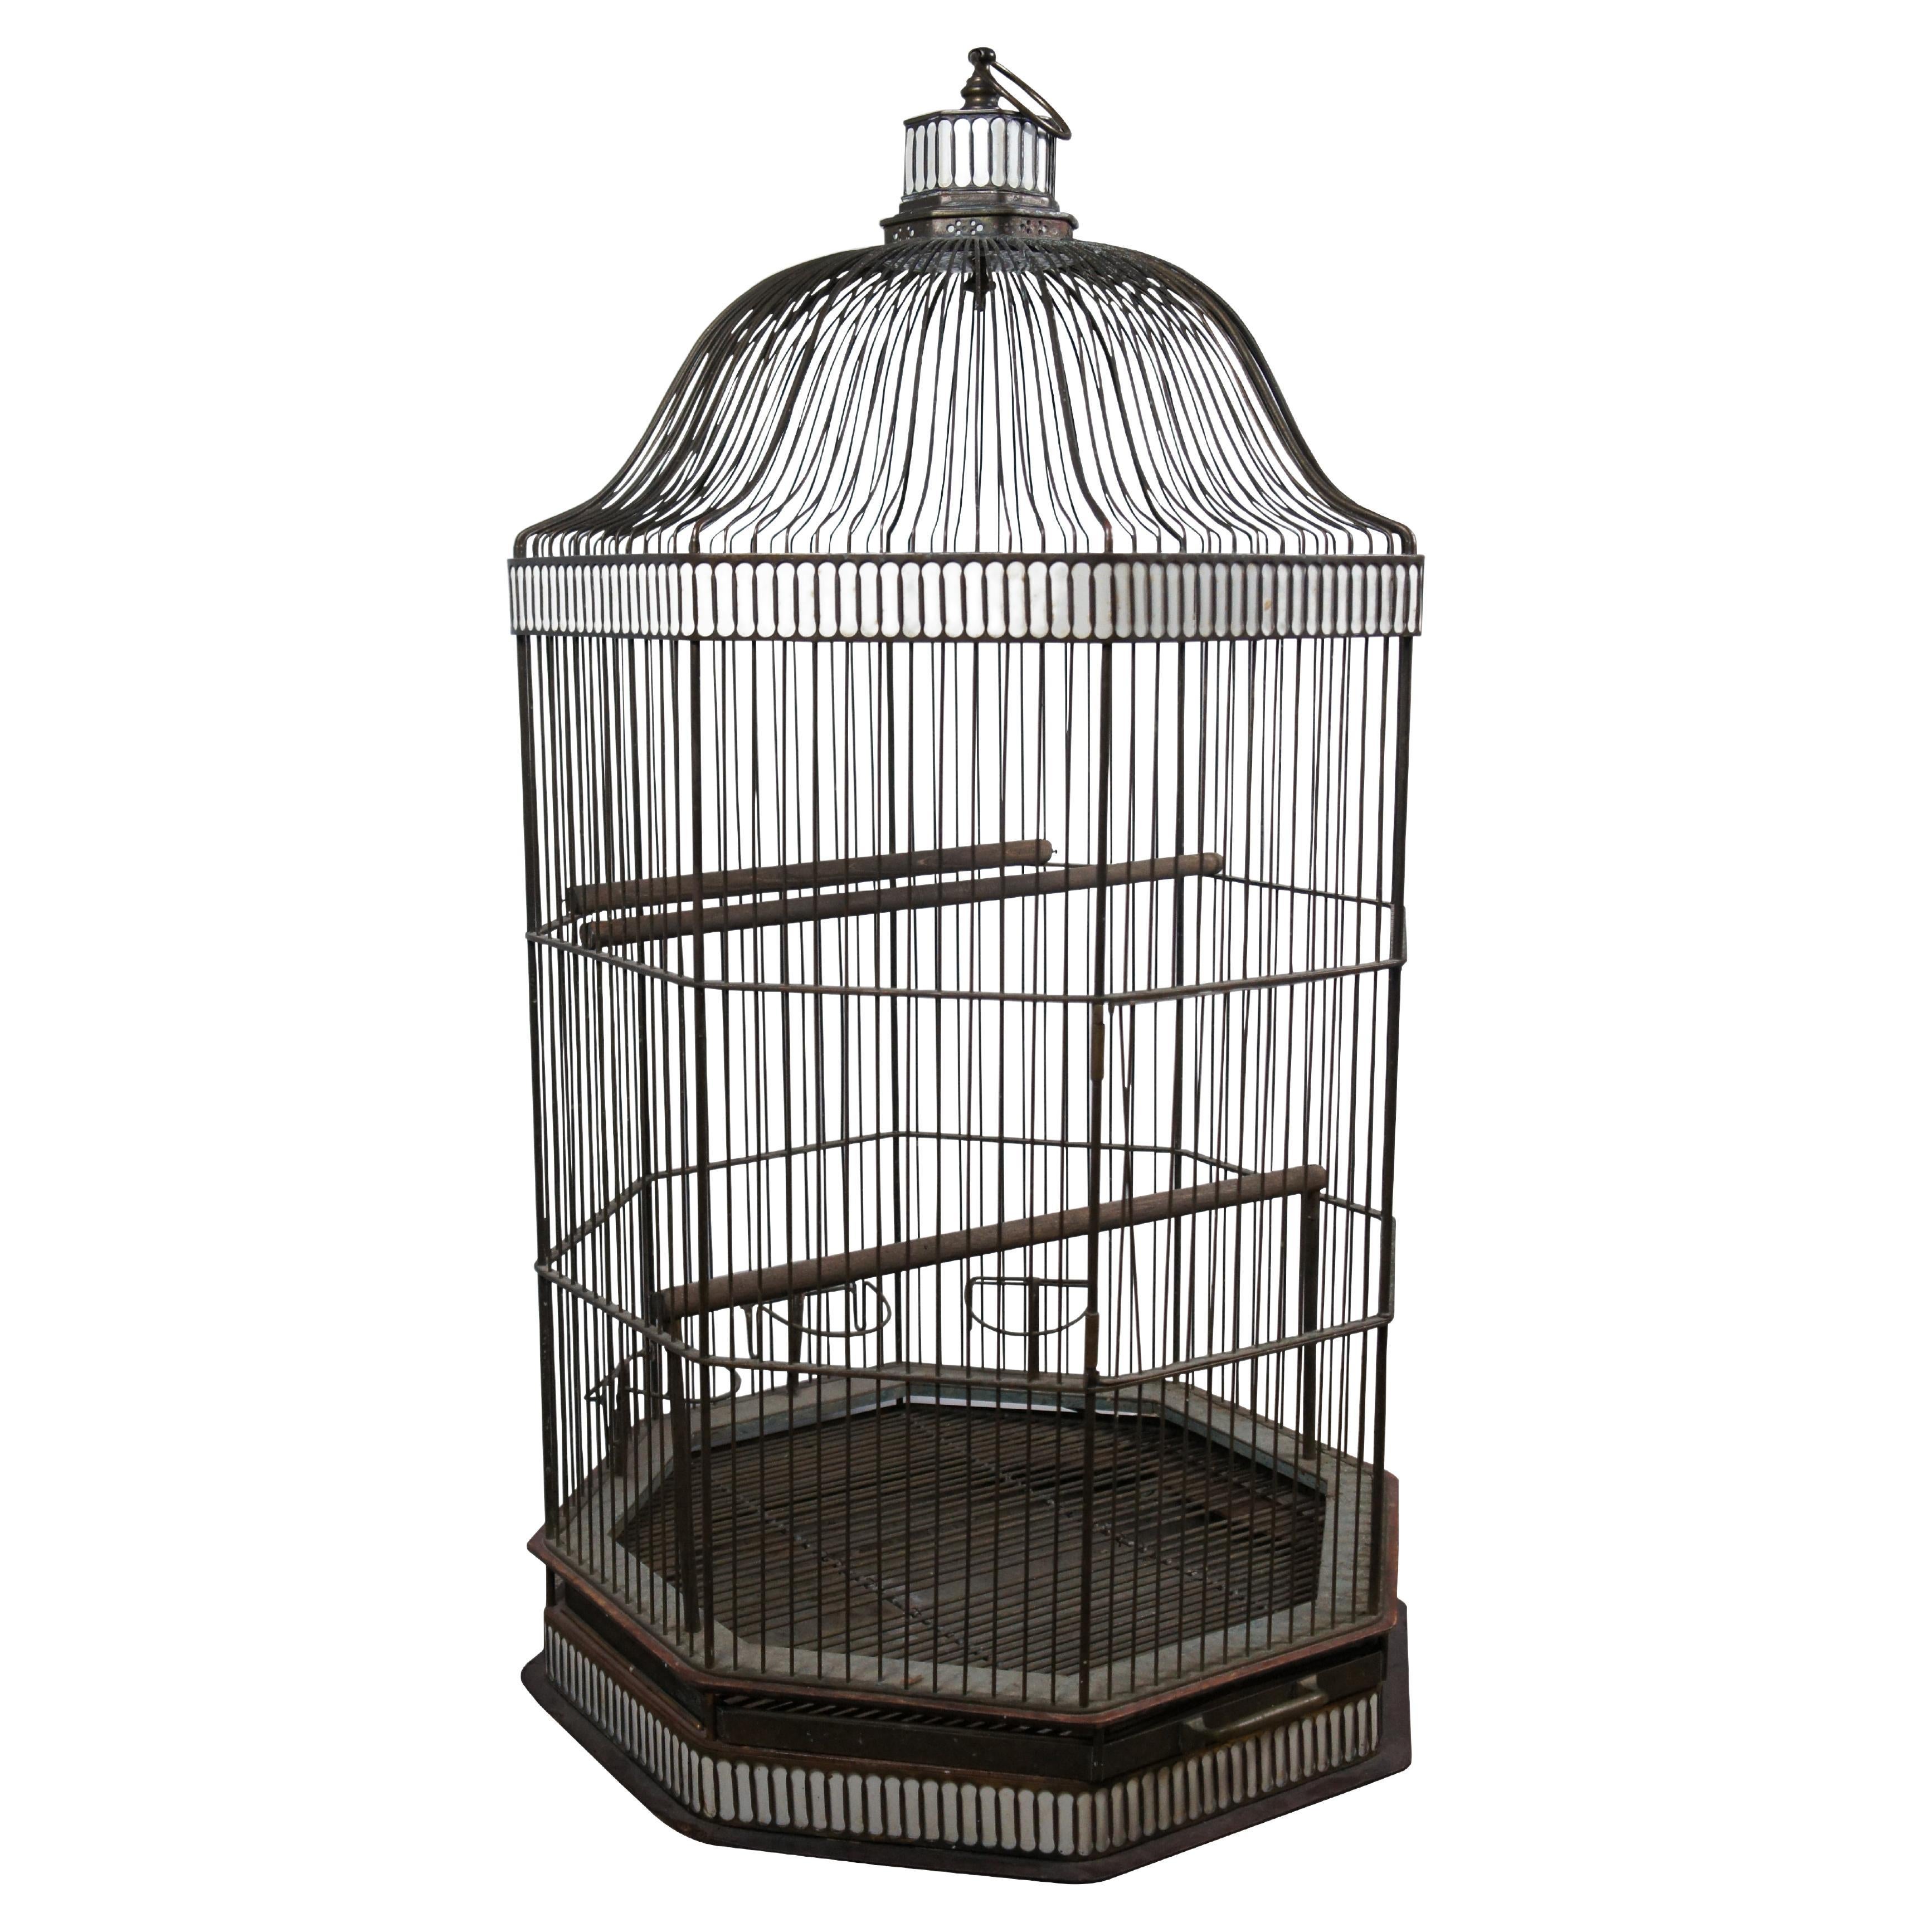 Gilt Bird Cages - 2 For Sale at 1stDibs